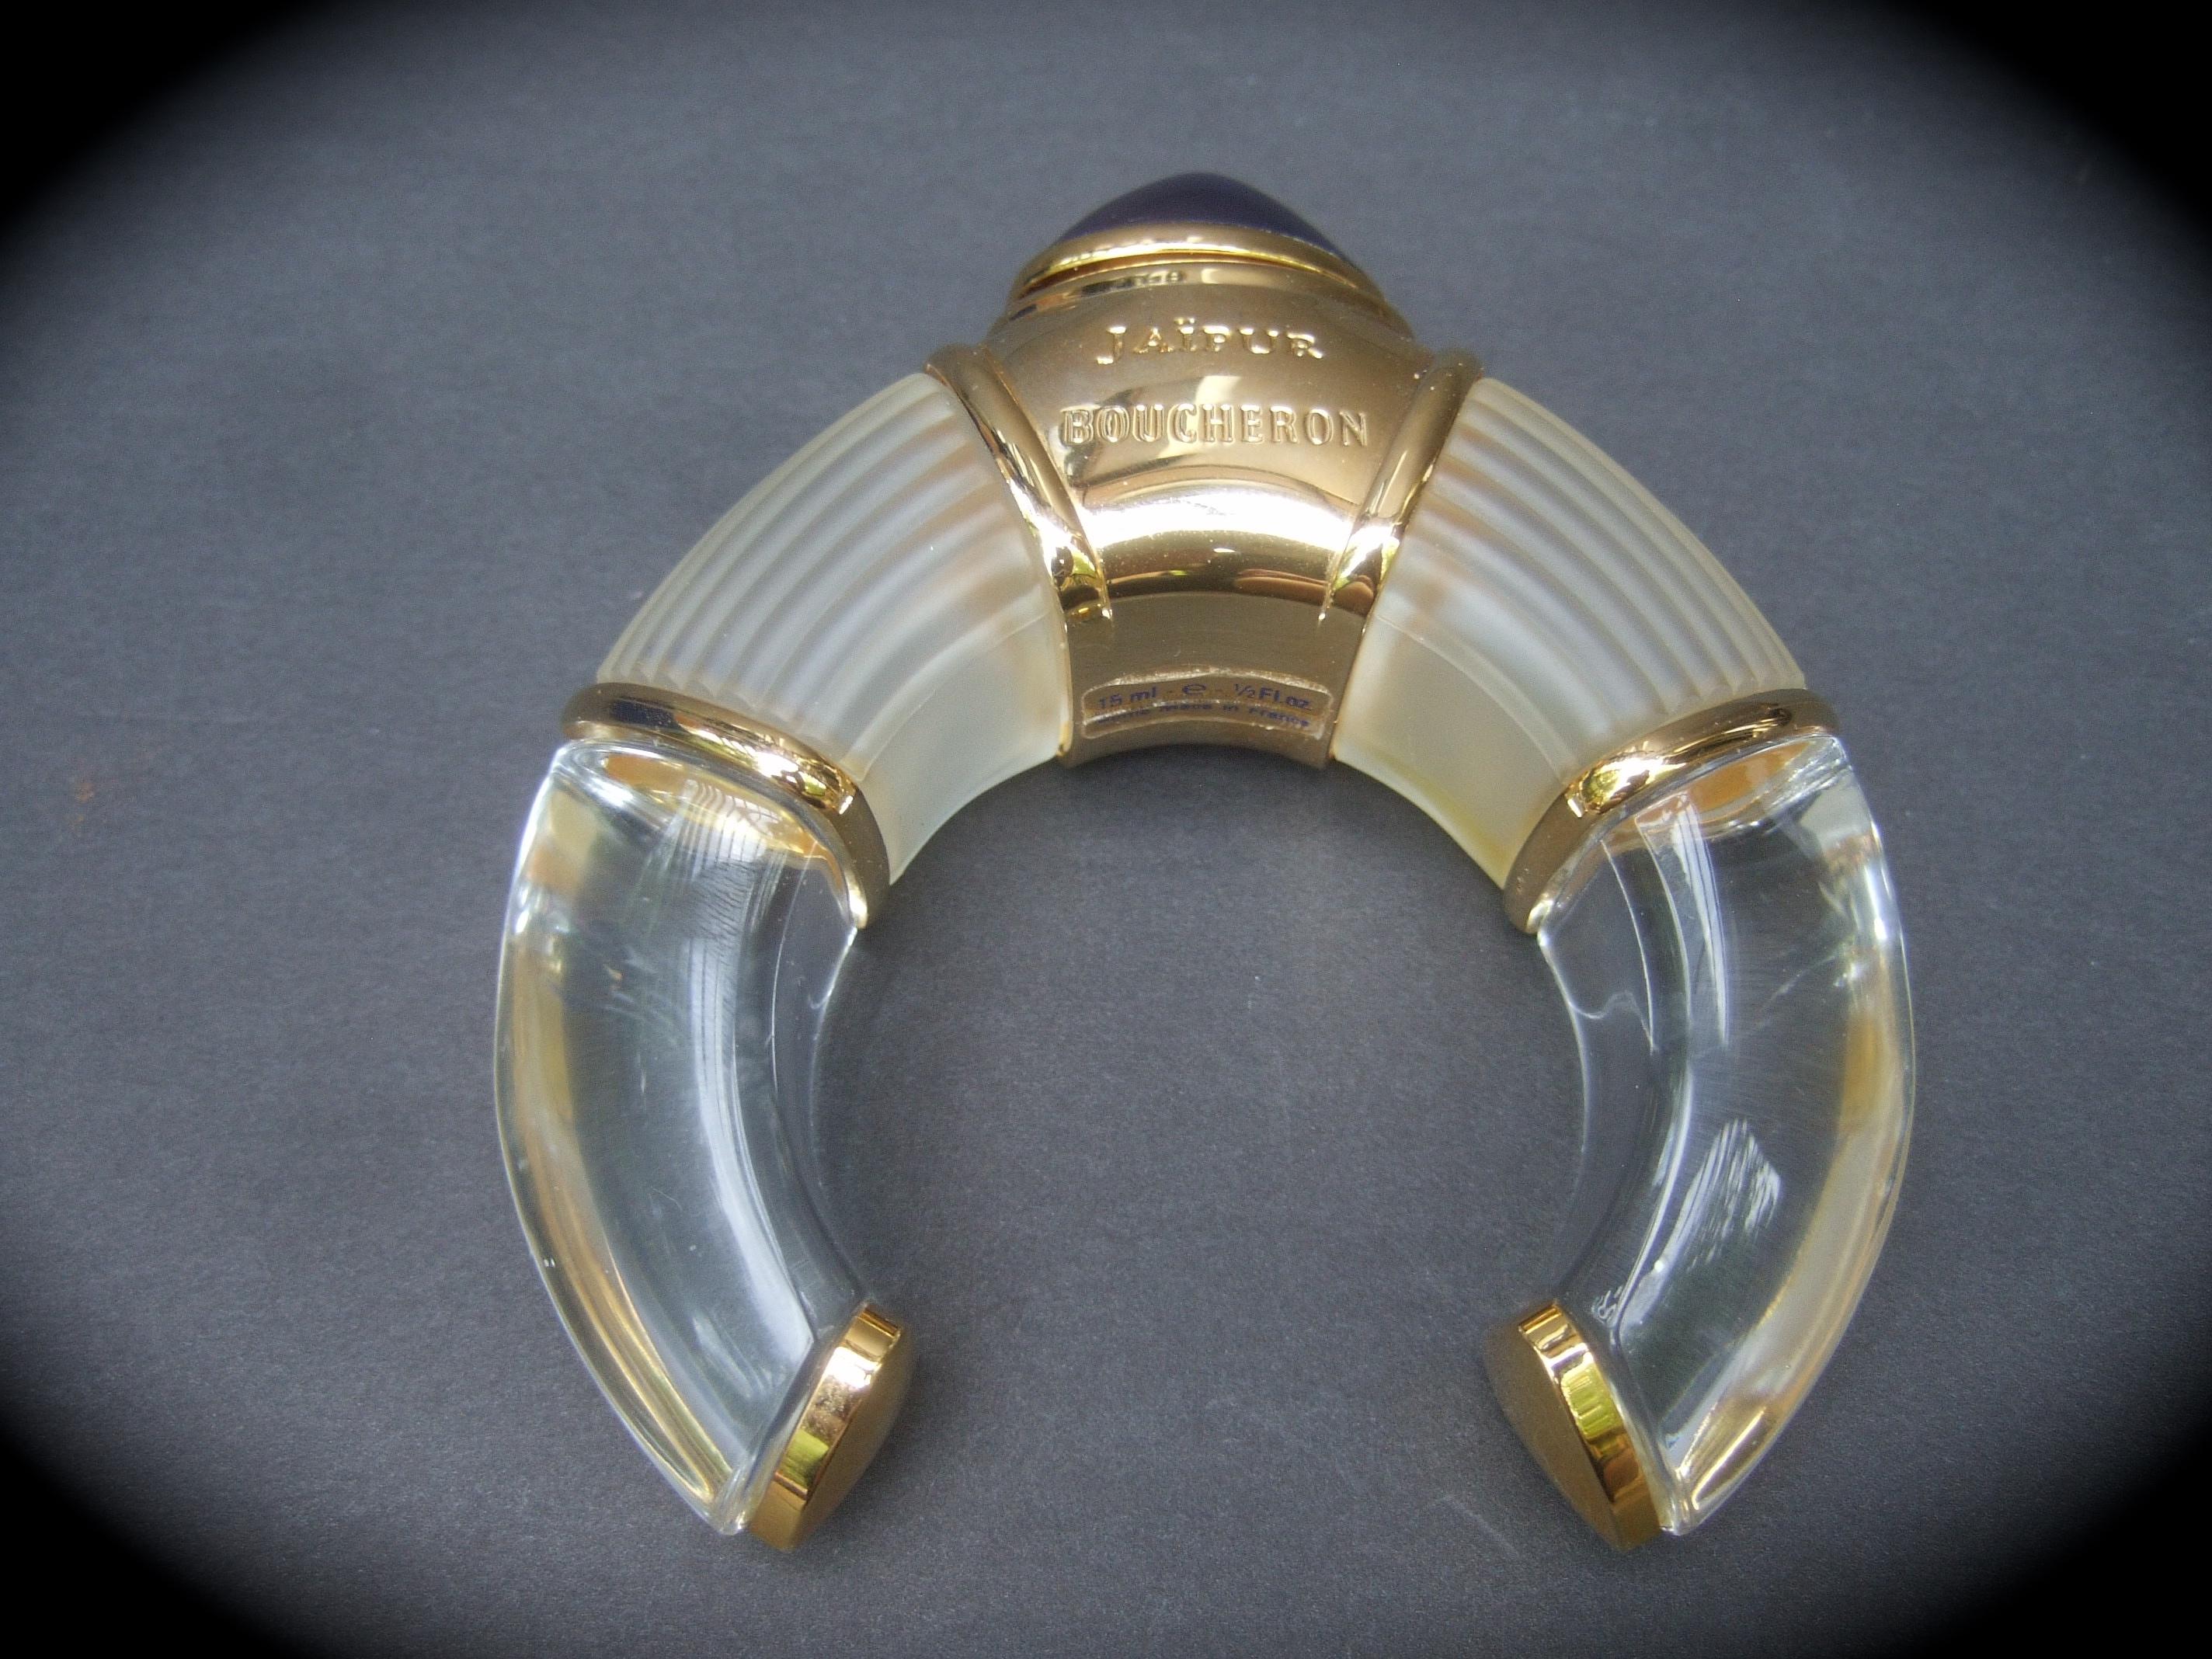 Boucheron Paris Jaipur Glass Bangle Shaped Fragrance Bottle in Presentation Box In Good Condition For Sale In University City, MO